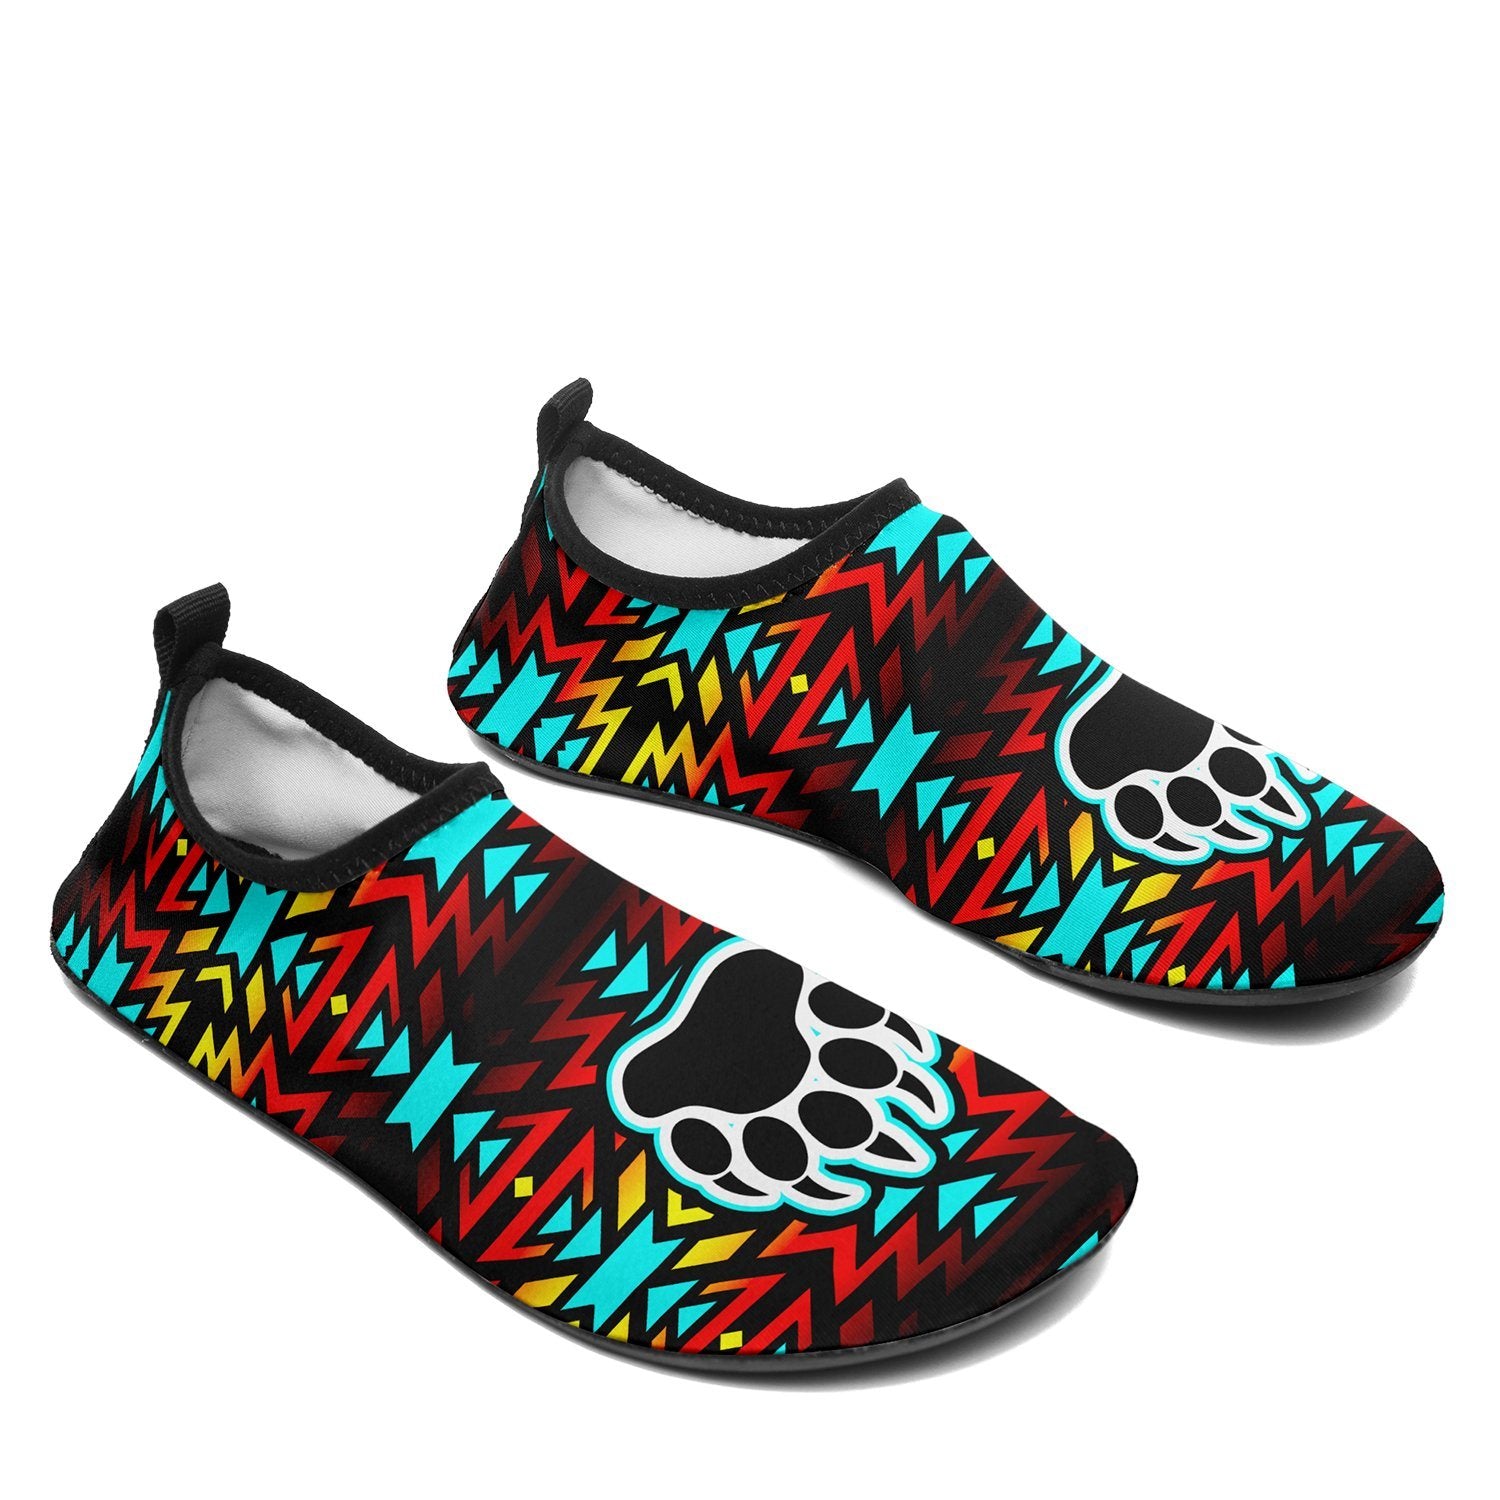 Fire Colors and Turquoise Bearpaw Sockamoccs Slip On Shoes 49 Dzine 